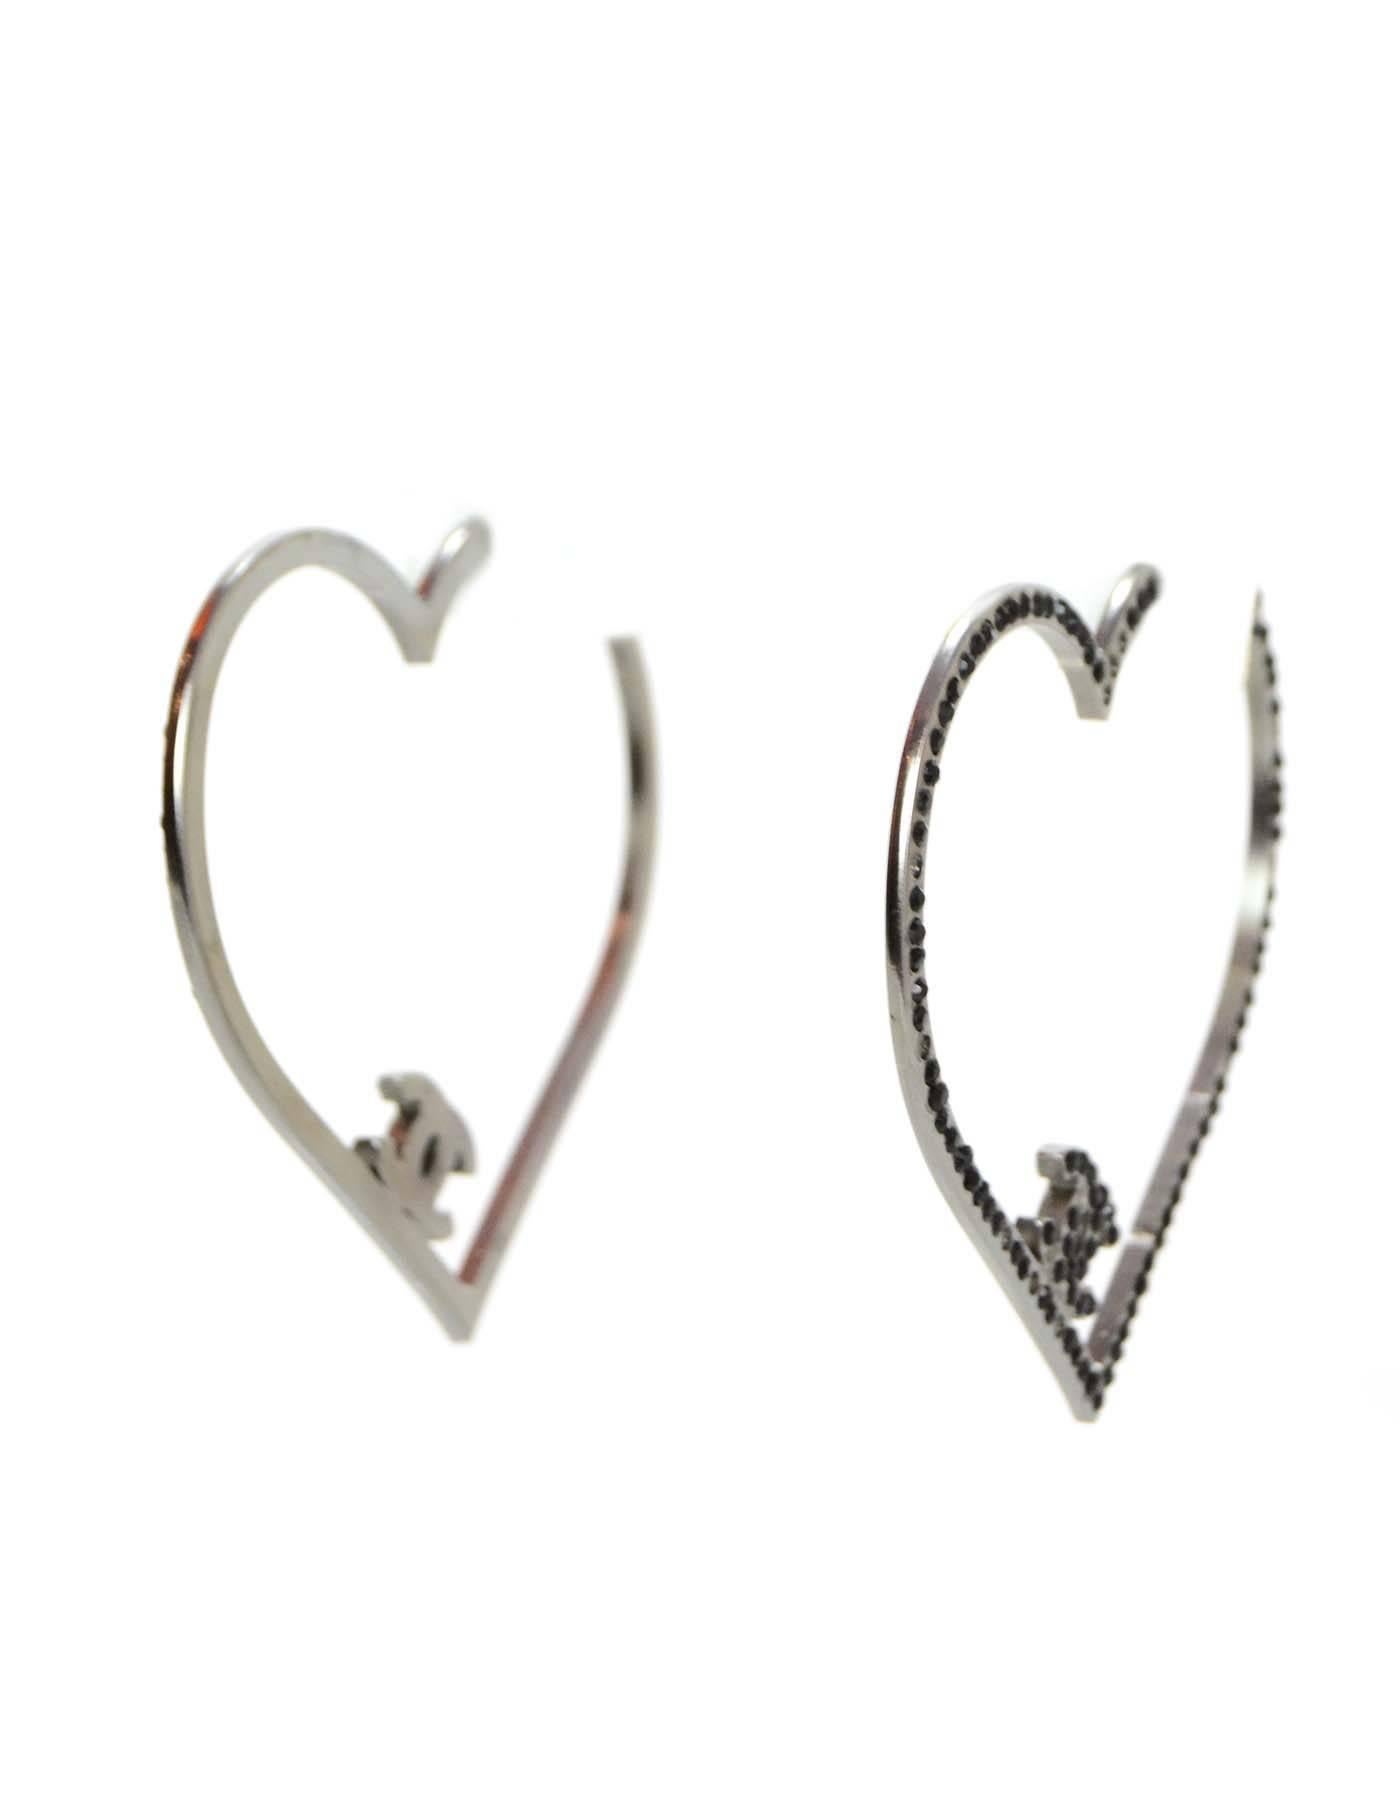 Chanel CC Heart Earrings

Color: Silver and black
Materials: Metal and pave stones
Closure: Pierced
Retail Price: $1,335 + tax
Overall Condition: Very good pre-owned condition with the exception of light surface marks and missing